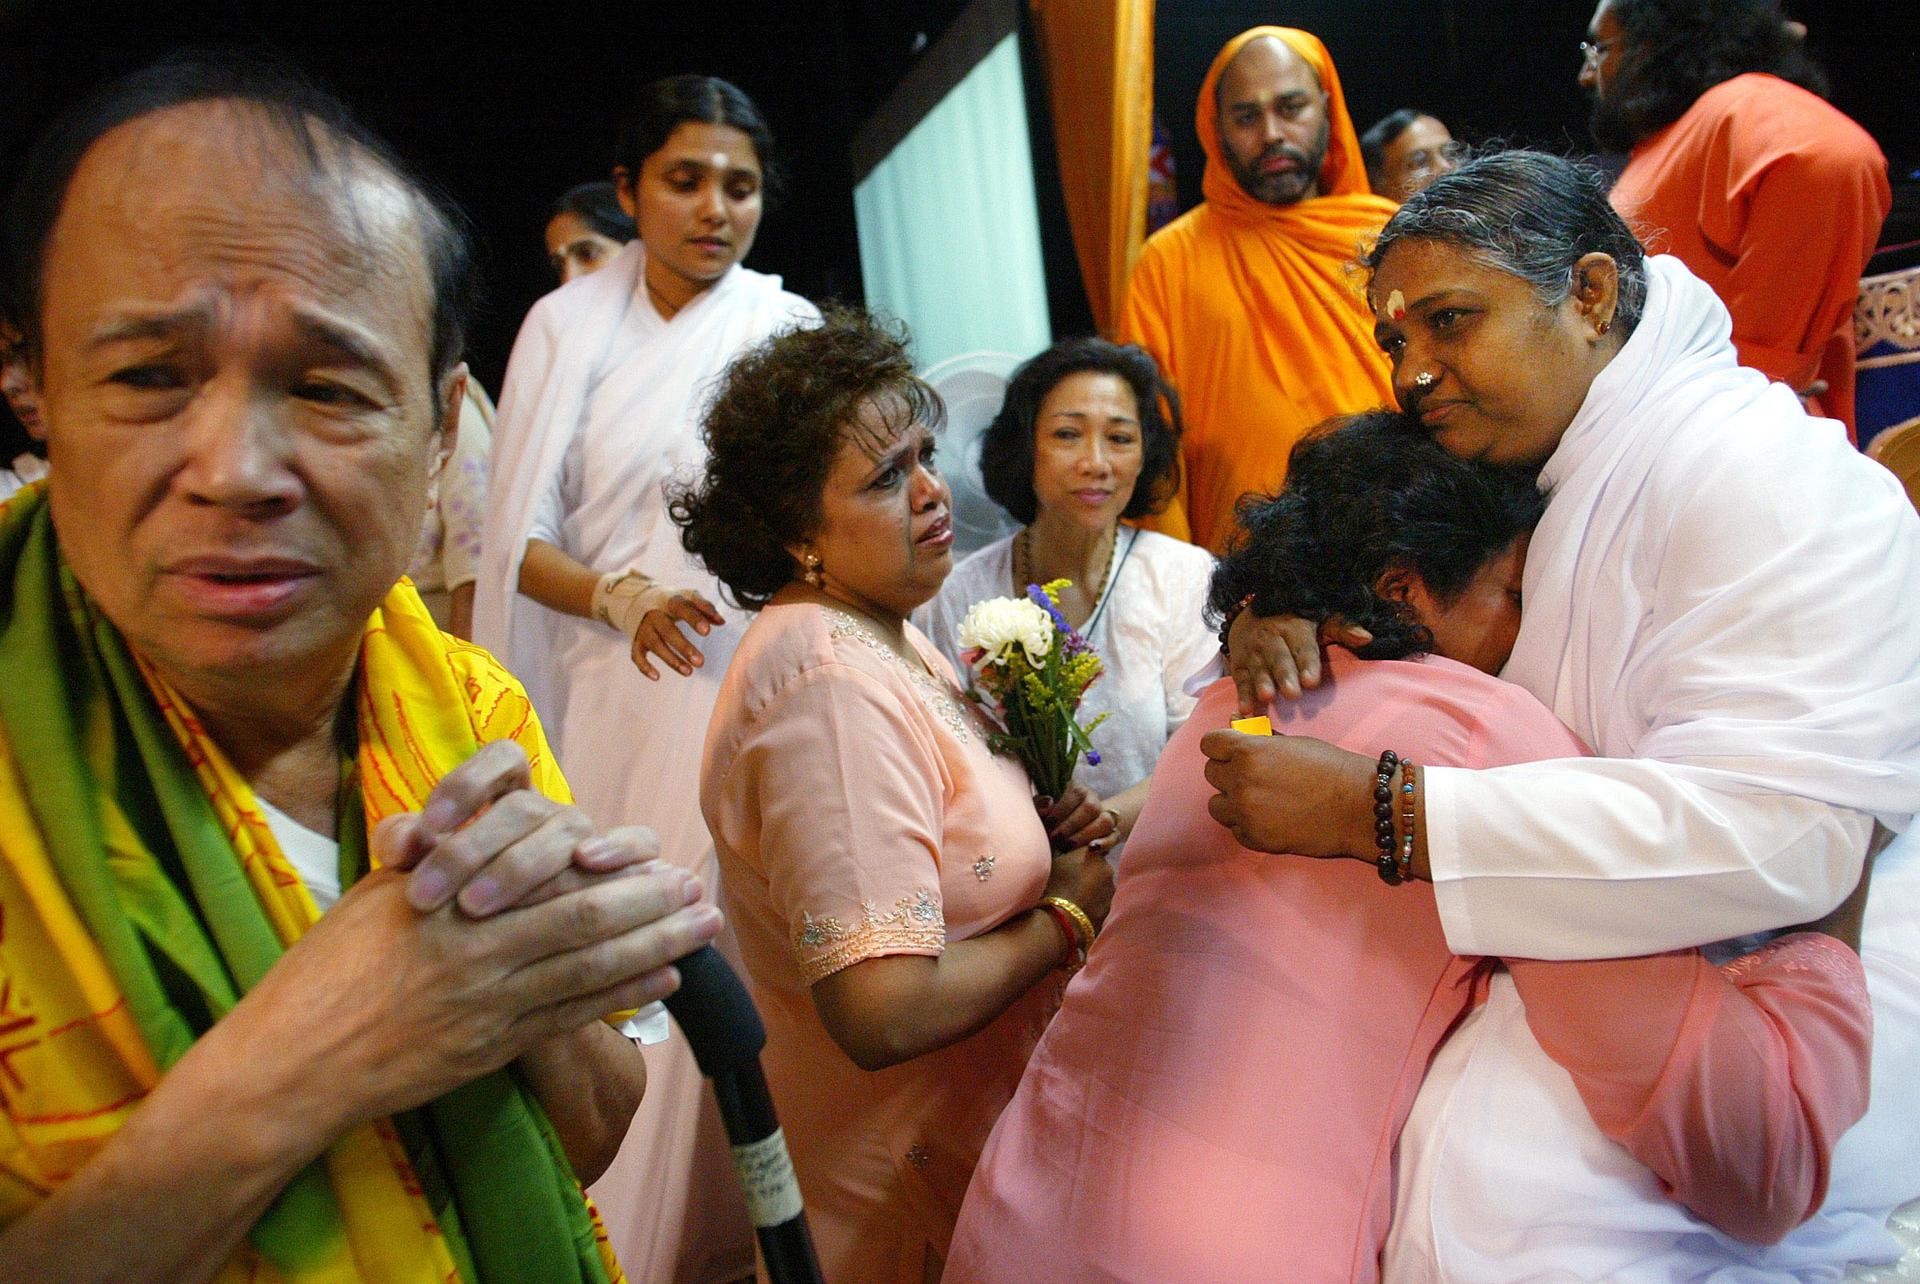 Amma embraces a devotee surrounded by others in orange and white robes